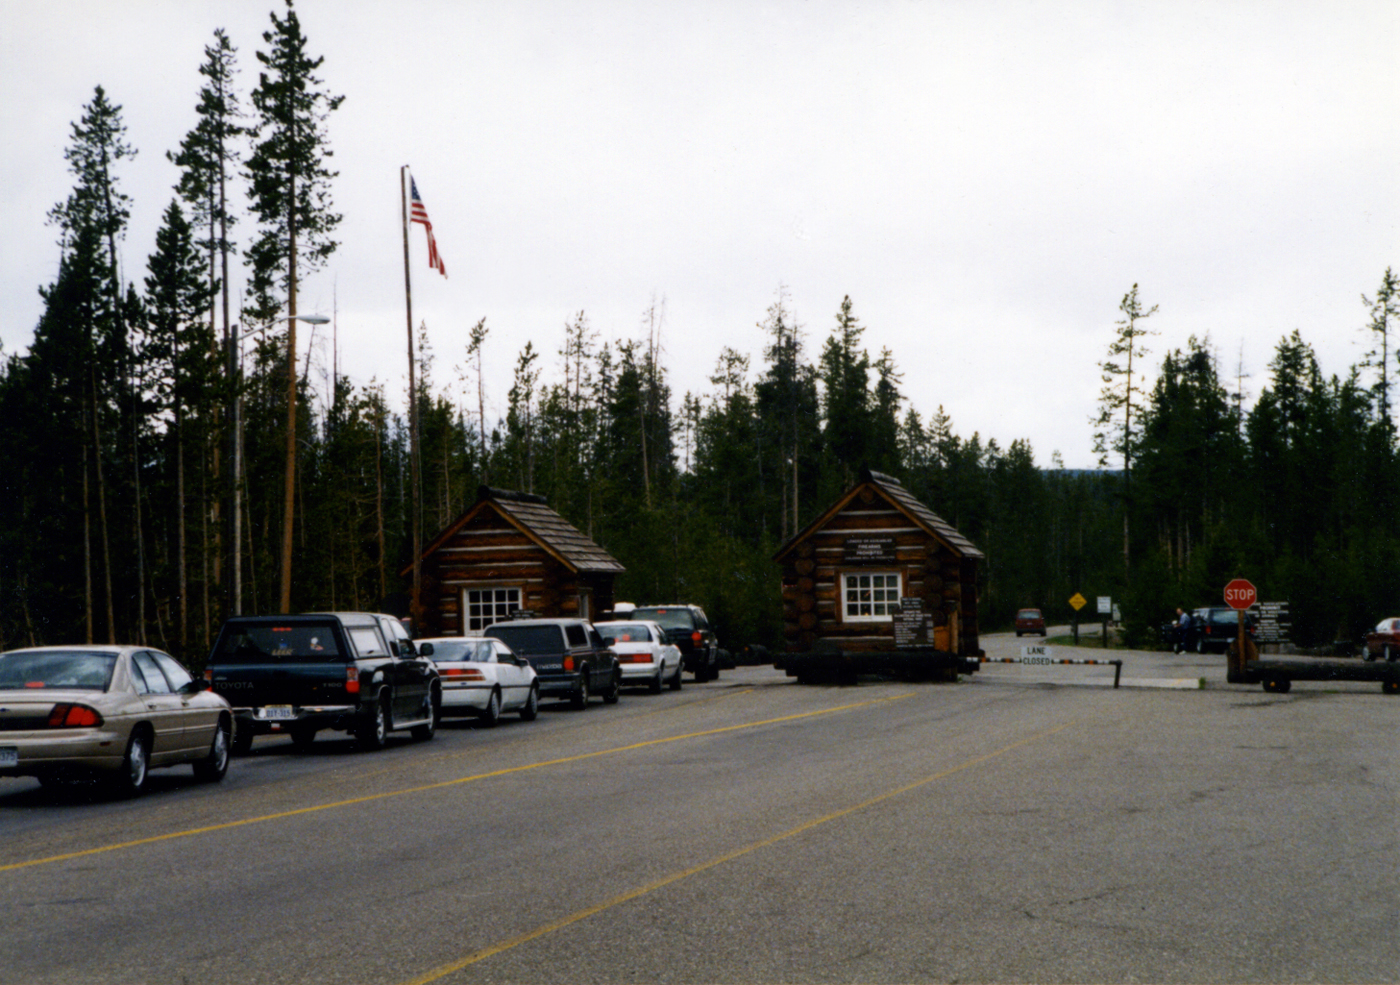 South Entrance to Yellowstone National Park by John William Uhler © Copyright All Rights Reserved